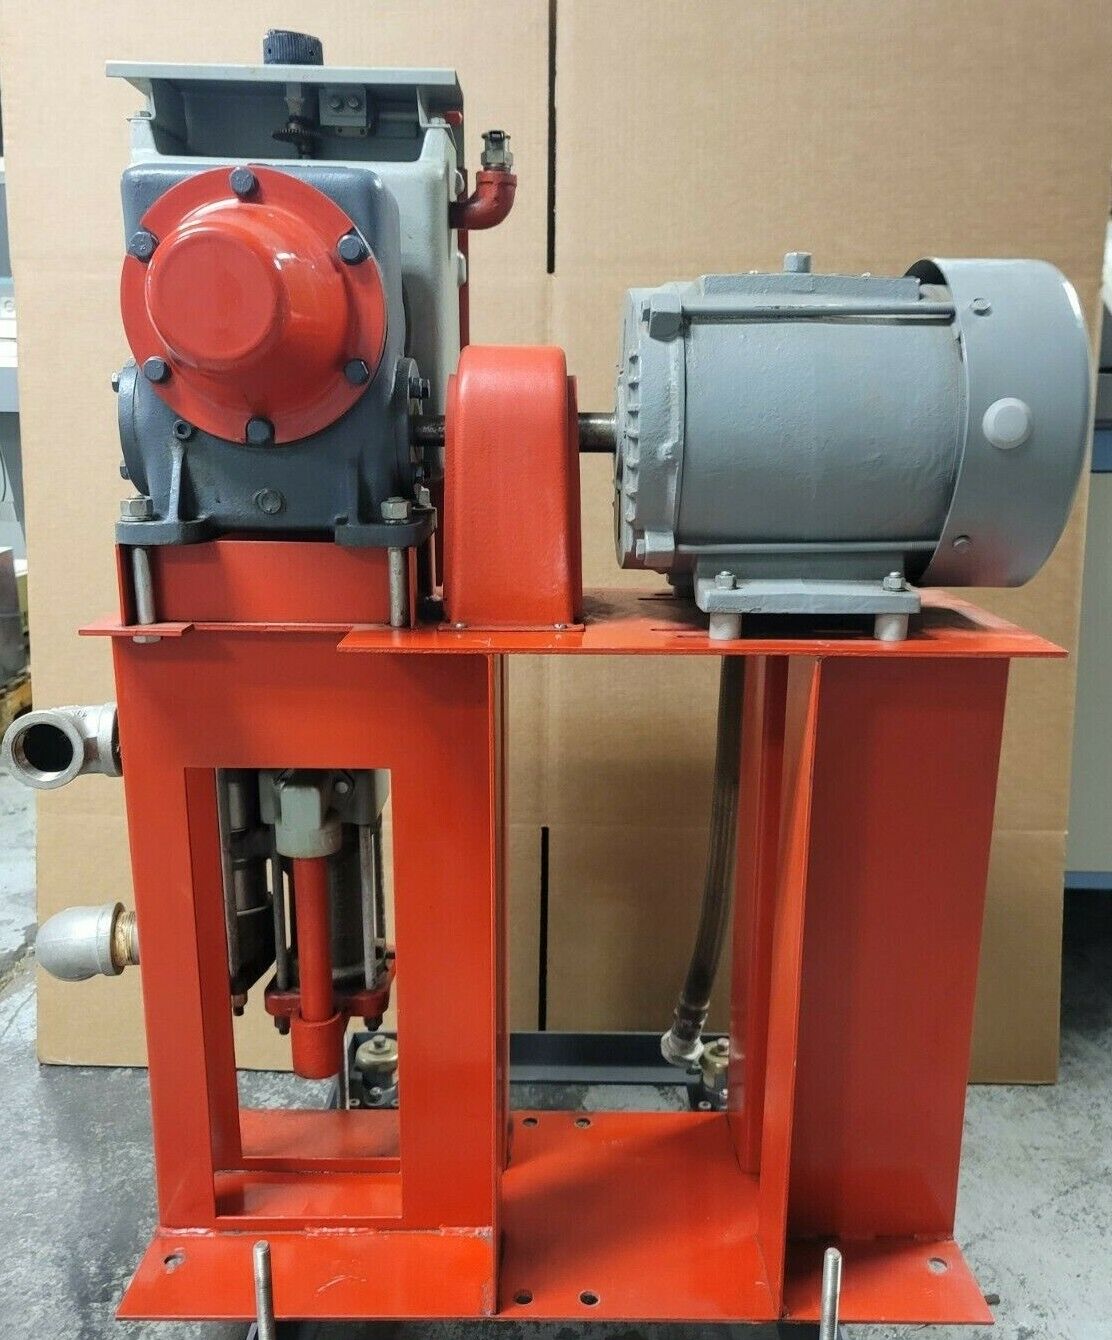 Bif Metering Pump 90 Gph With Winsmith Speed Reducer And 3 Hp Motor Setup